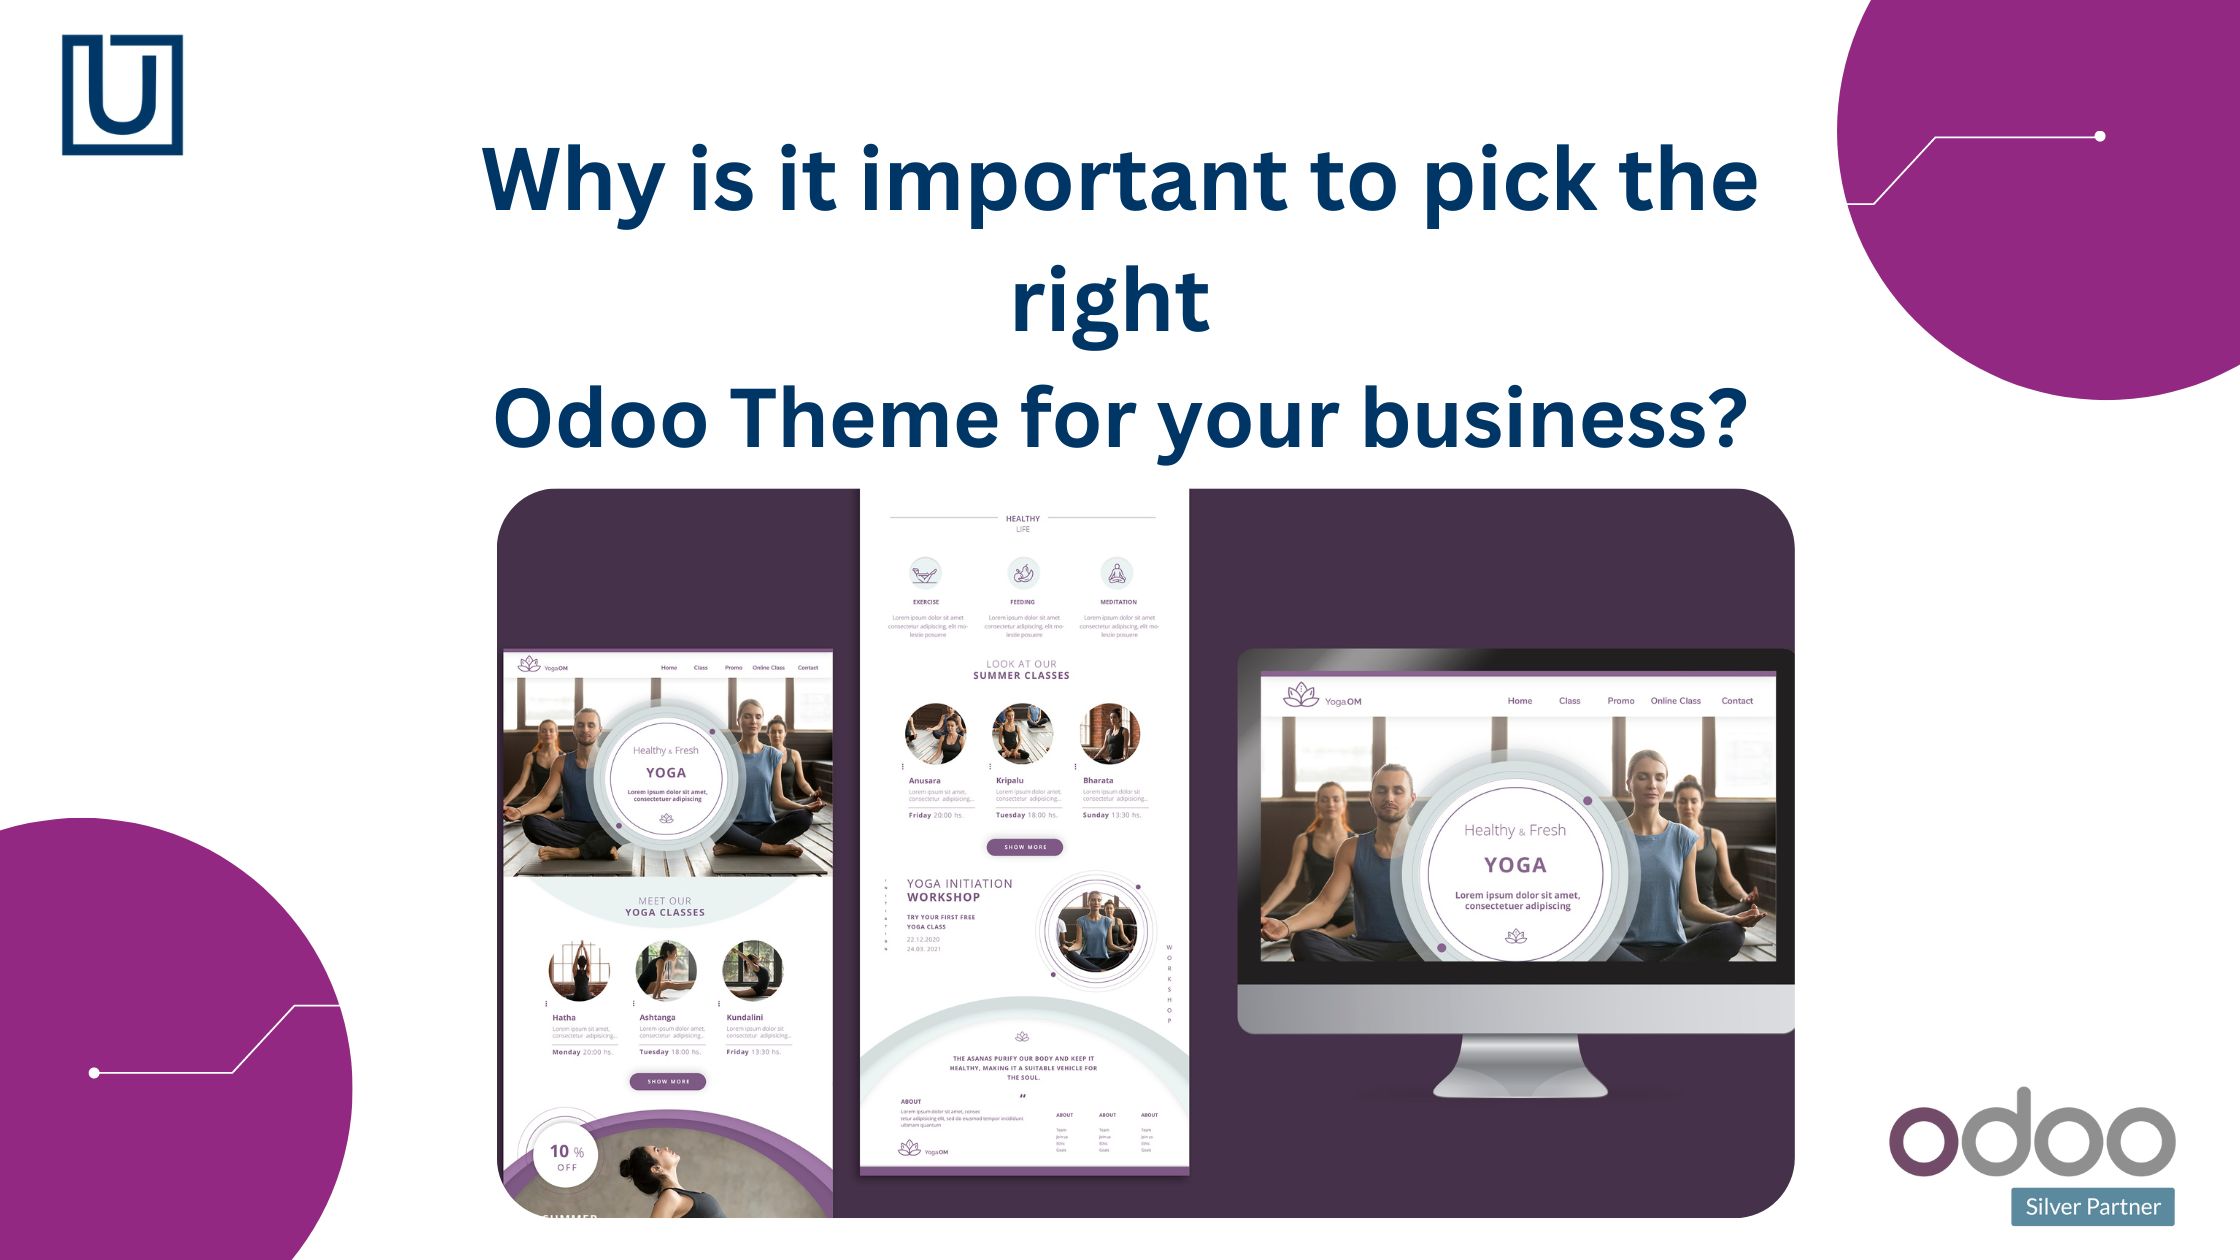 Why is it important to pick the right Odoo Theme for your business?